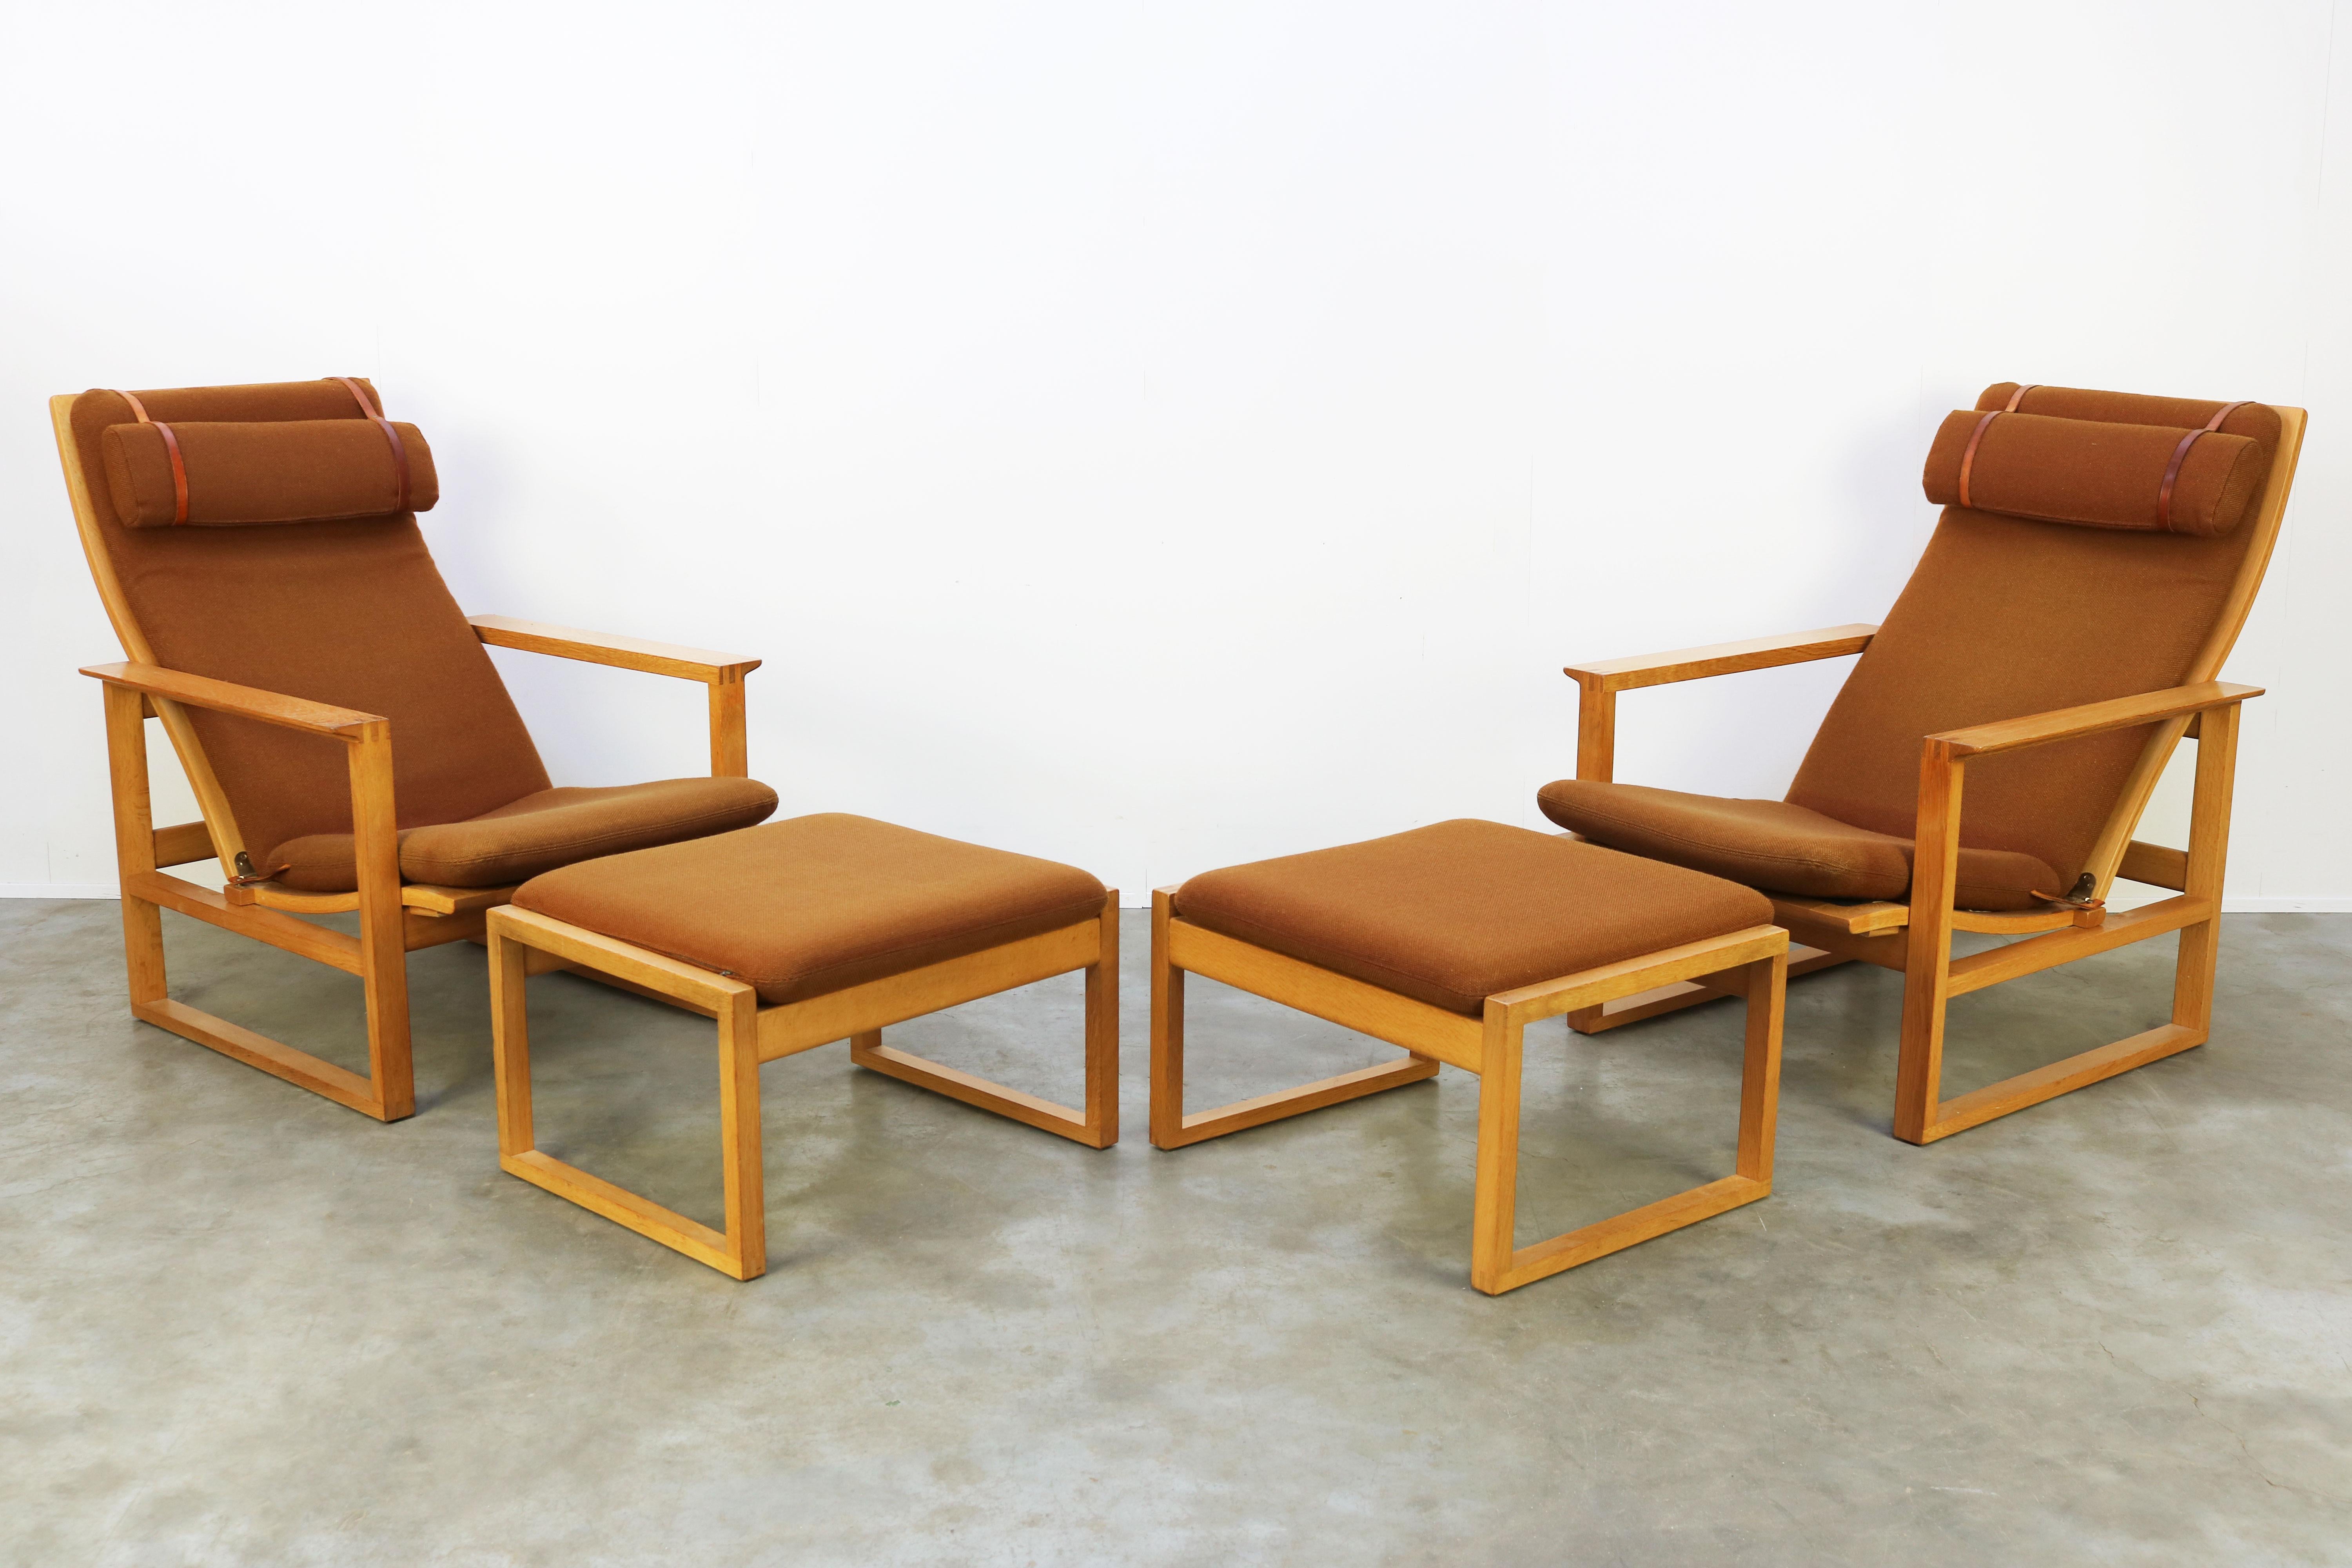 Mid-20th Century Rare Pair of Model 2254 Lounge Chairs by Børge Mogensen with Ottomans 1950s Wool For Sale